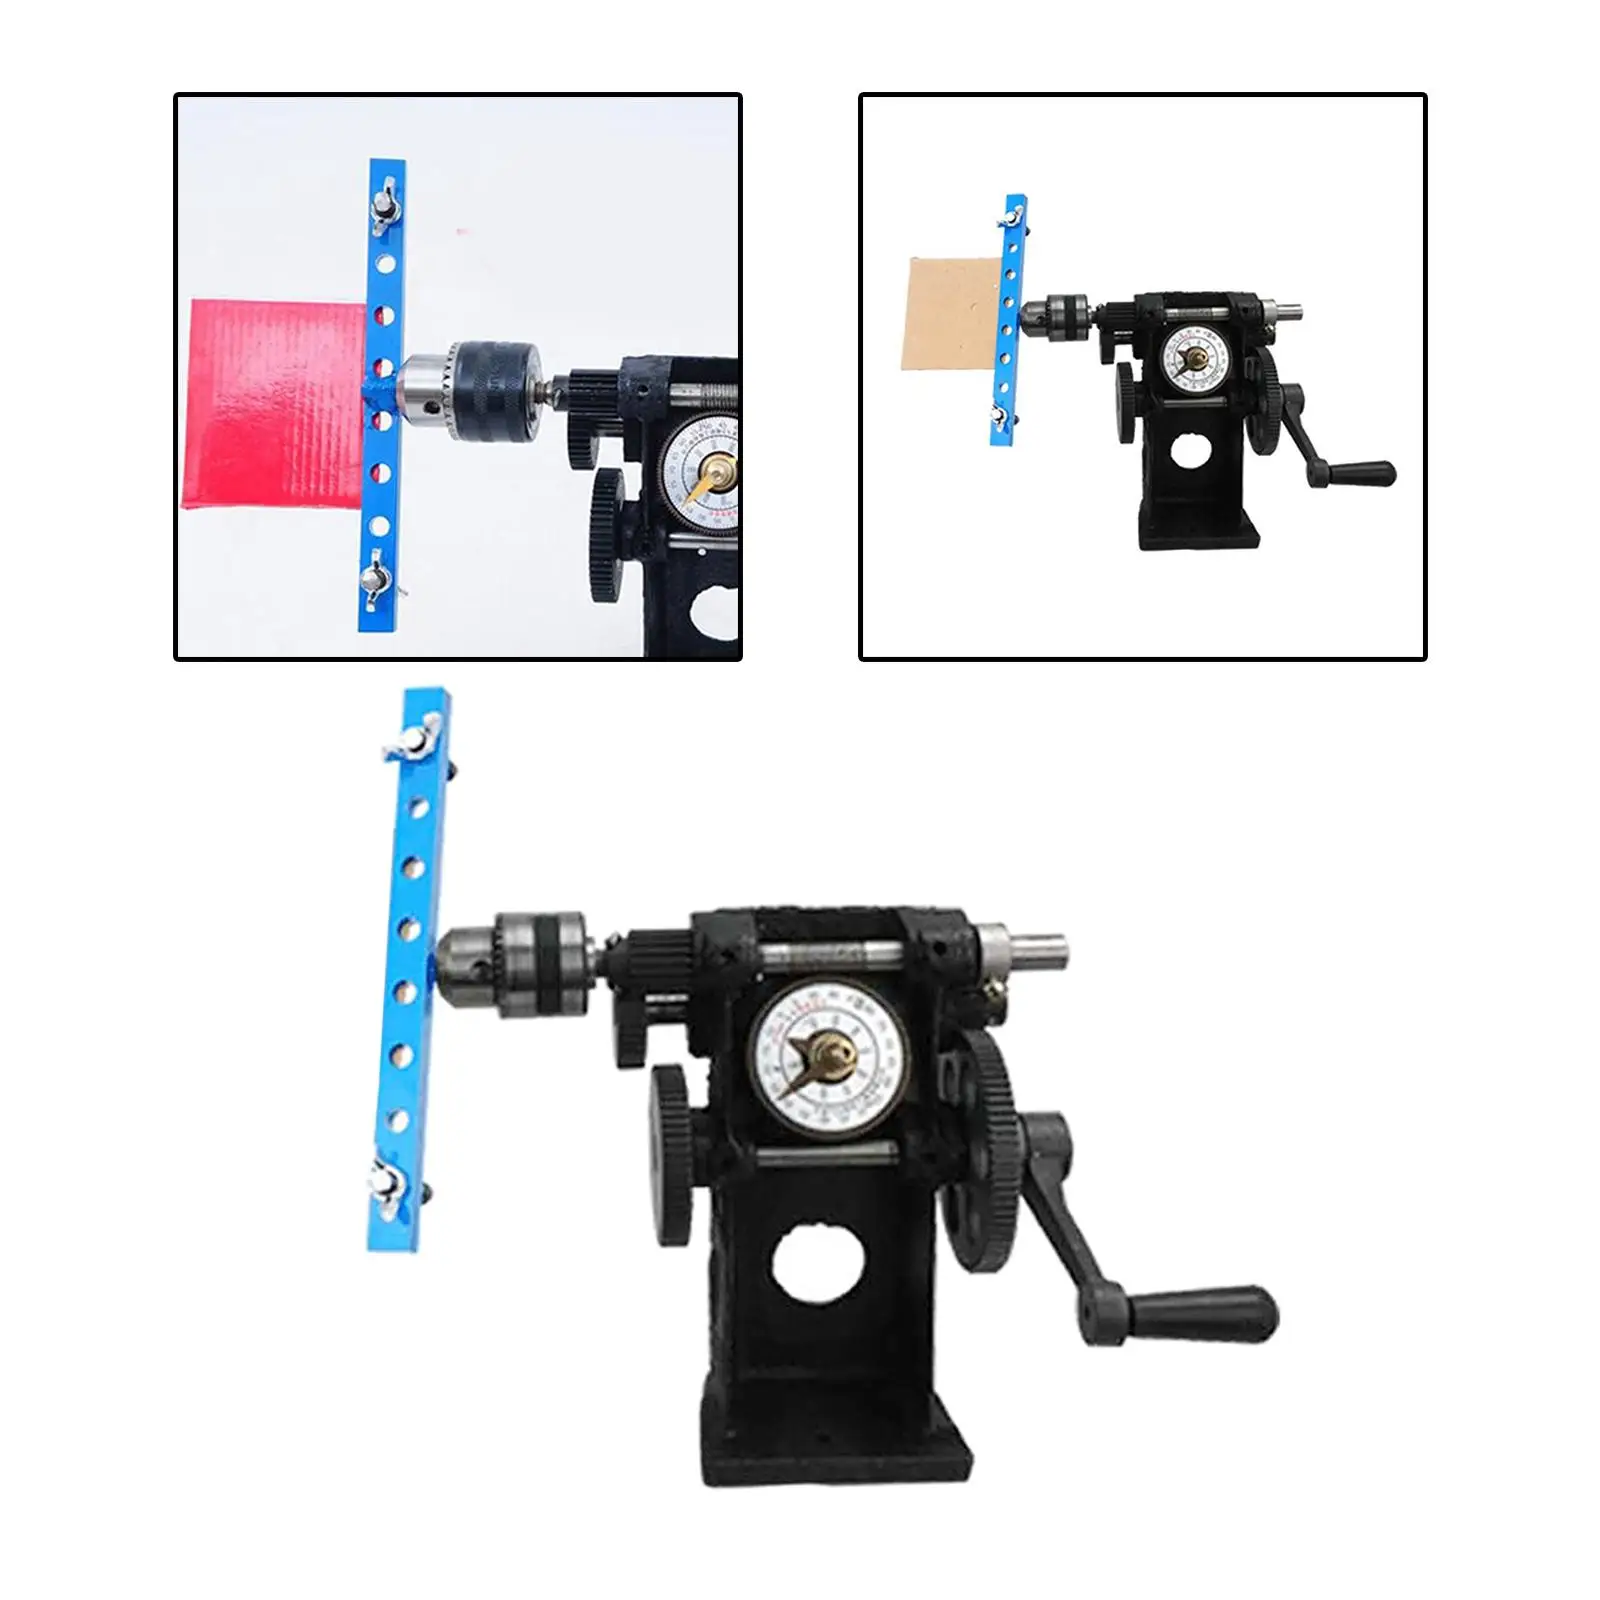 Manual Winder Machine 5mm~200mm Clamping Width Heavy Duty Paper Sheet Winding Easy to Use for Sewing Crafts DIY Cards